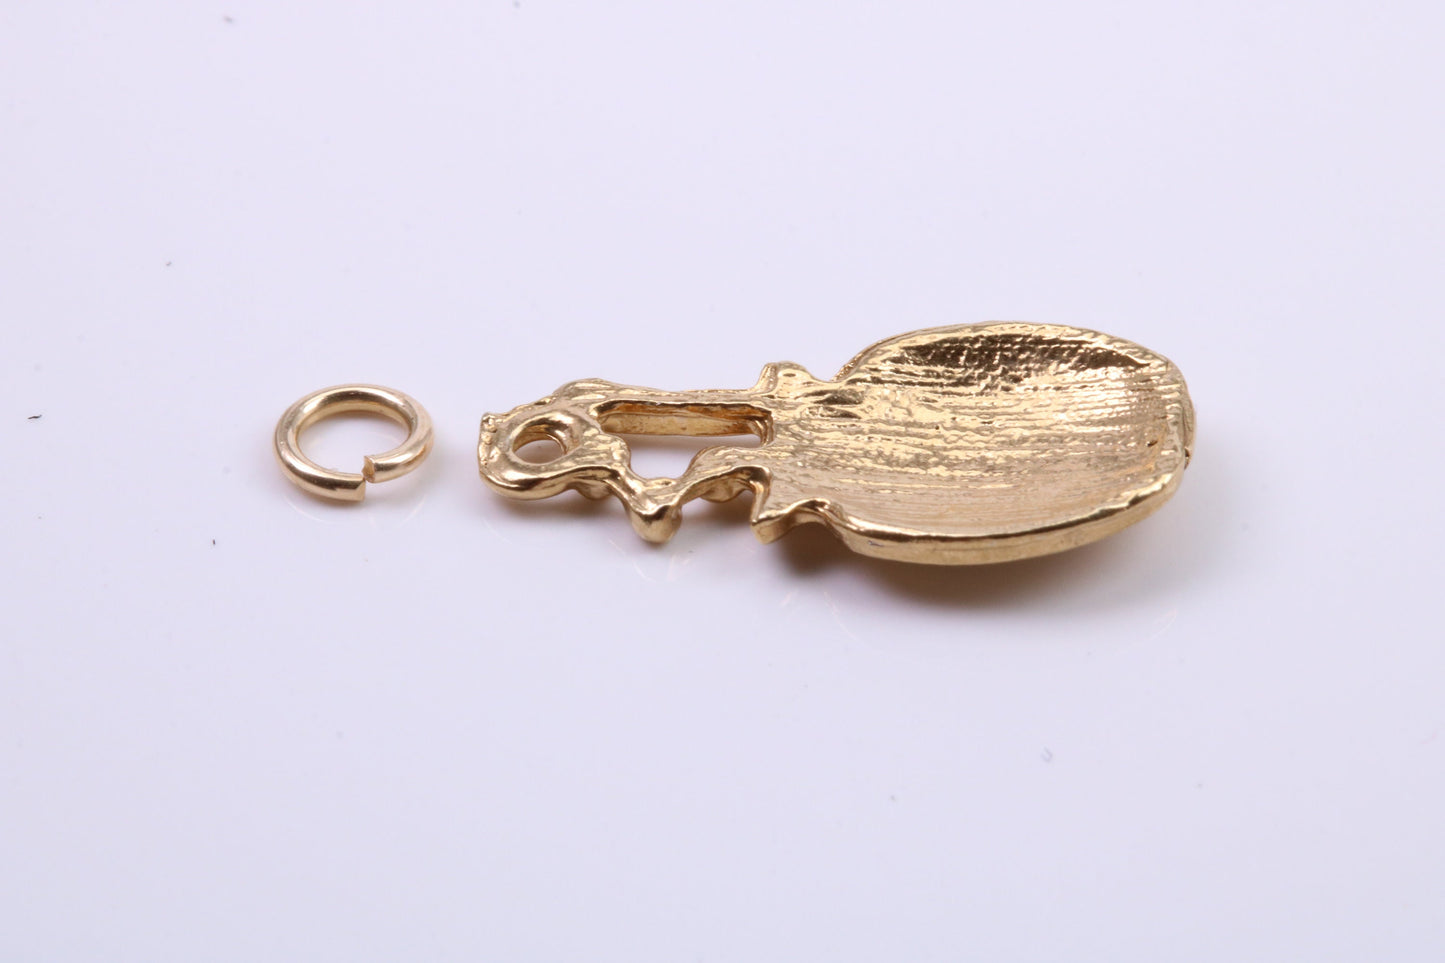 Cooking Pot Charm, Traditional Charm, Made from Solid 9ct Yellow Gold, British Hallmarked, Complete with Attachment Link